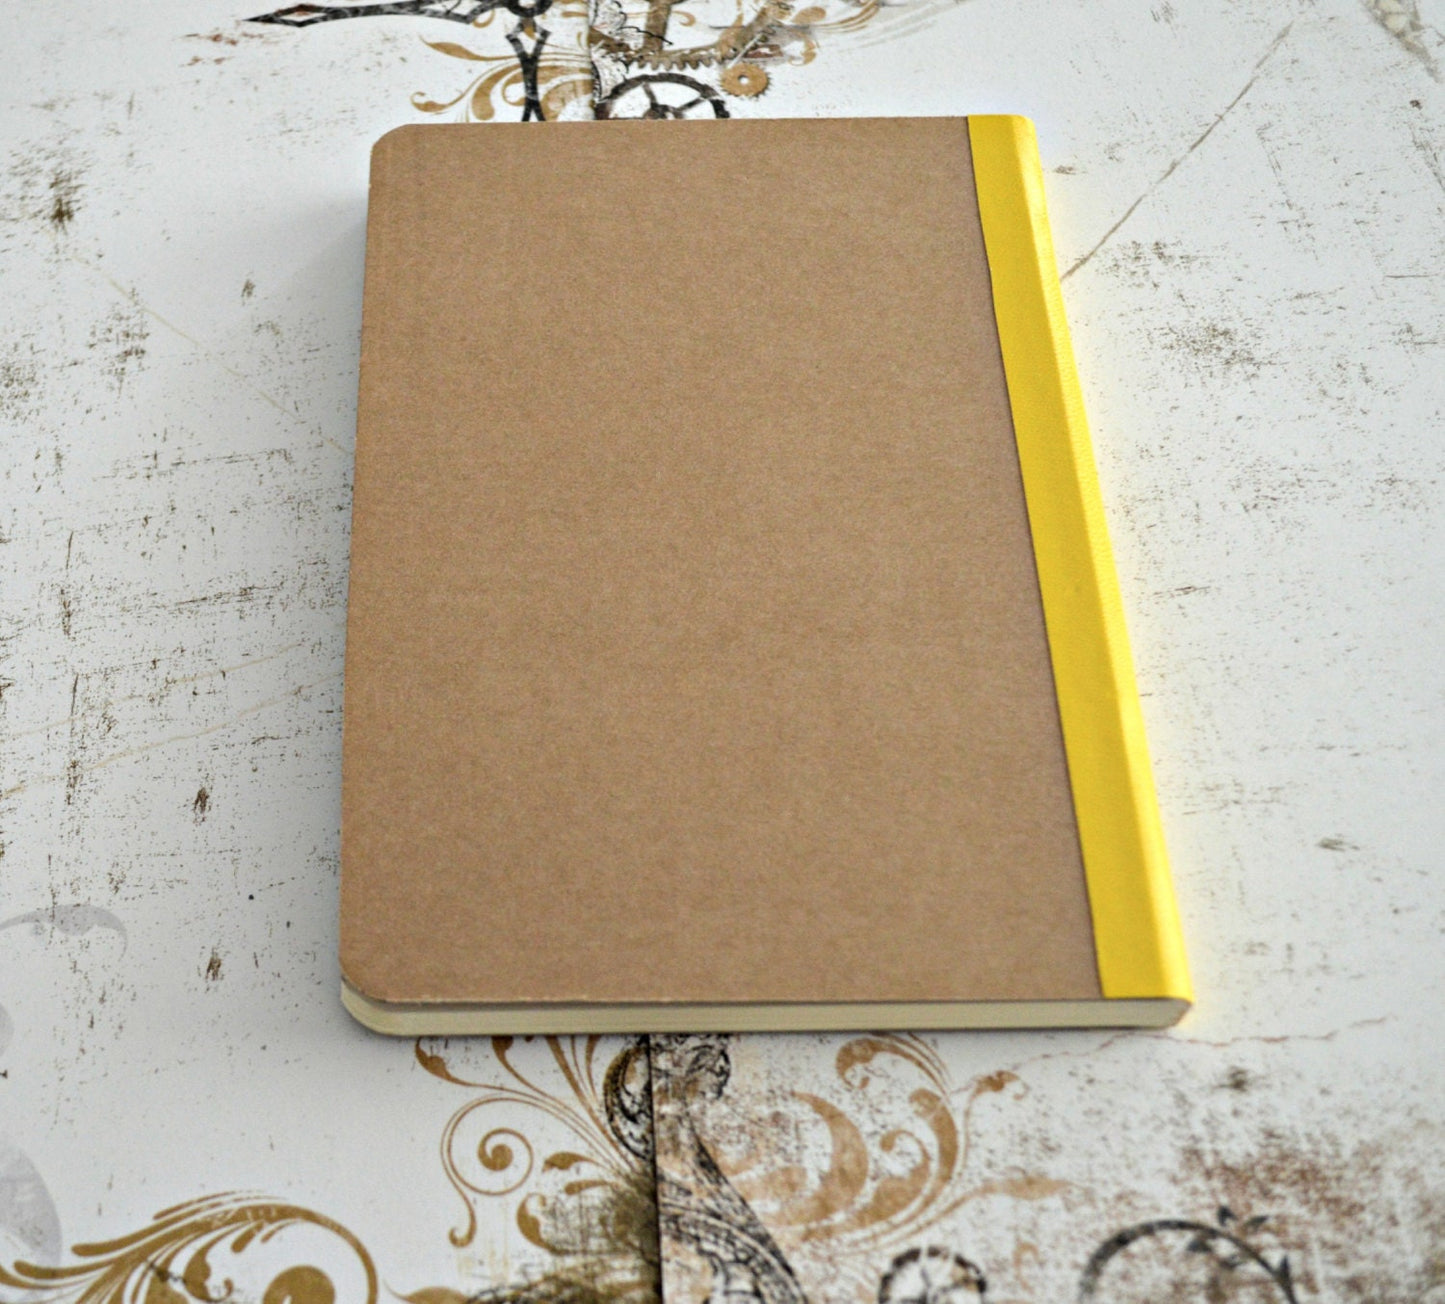 Small Hardcover Watercolor Journal Sketchbook with 40 pages of 300 gsm Mixed Media paper